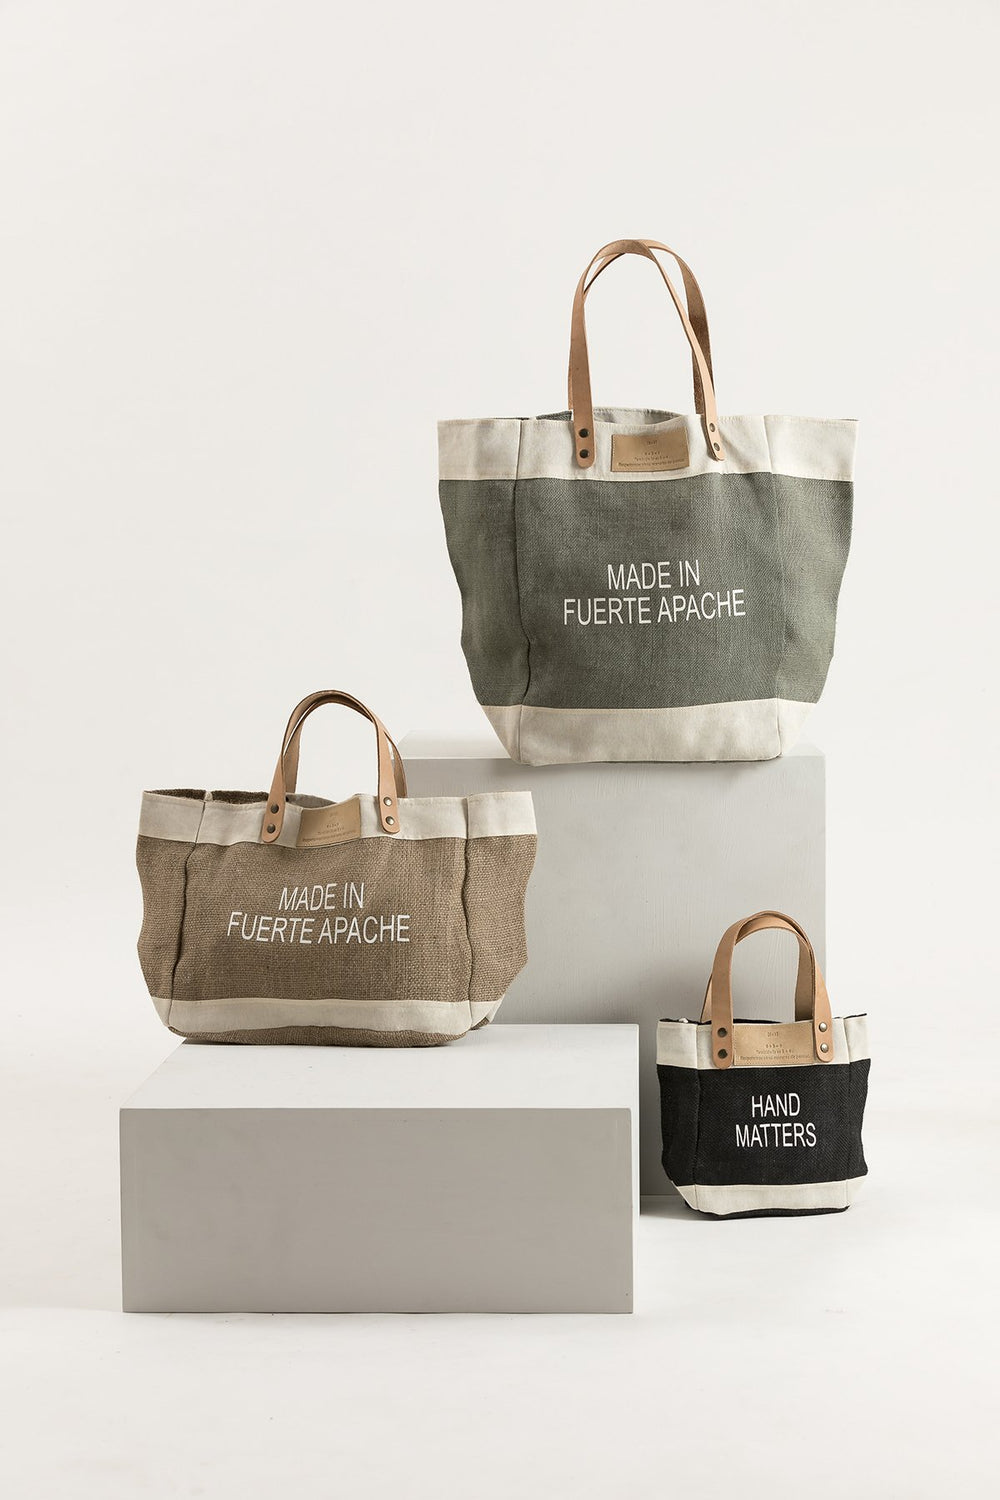 Hand Matters. Burlap Tote Bags in sizes and colors